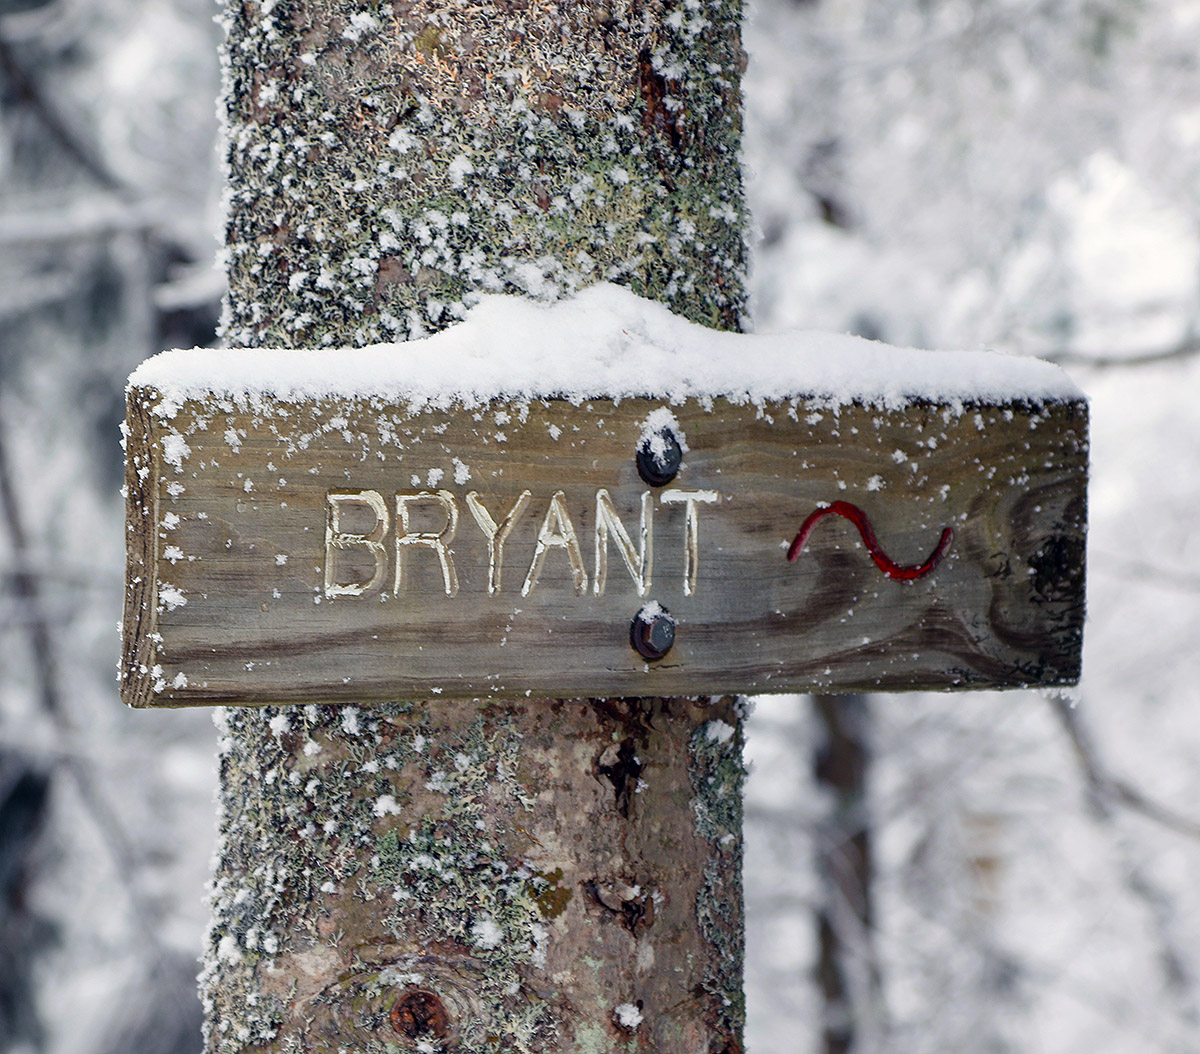 An image of fresh snow on a trail sign for the Brant Trail on the Nordic and Backcountry network of ski trails at Bolton Valley Ski Resort in Vermont